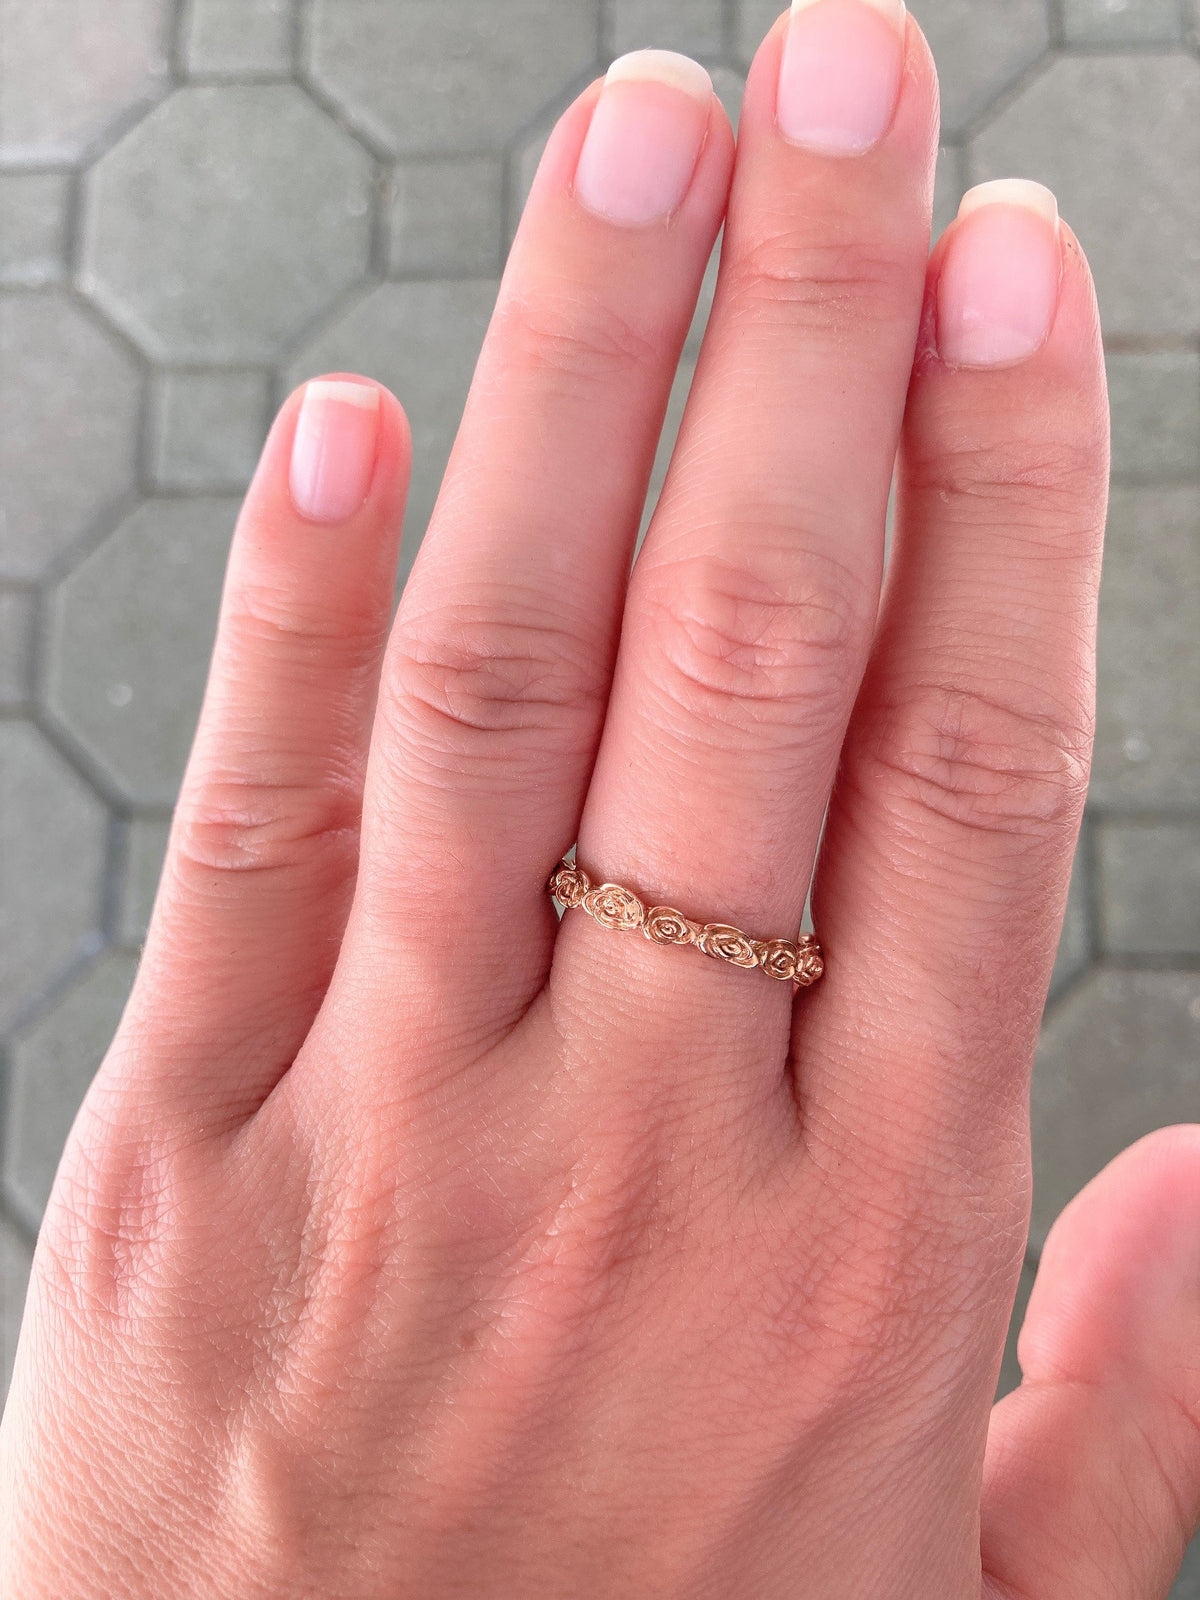 Pink Sapphire Eternity Stack Ring | 14K Yellow Gold | EF Collection 14K Rose Gold / 7